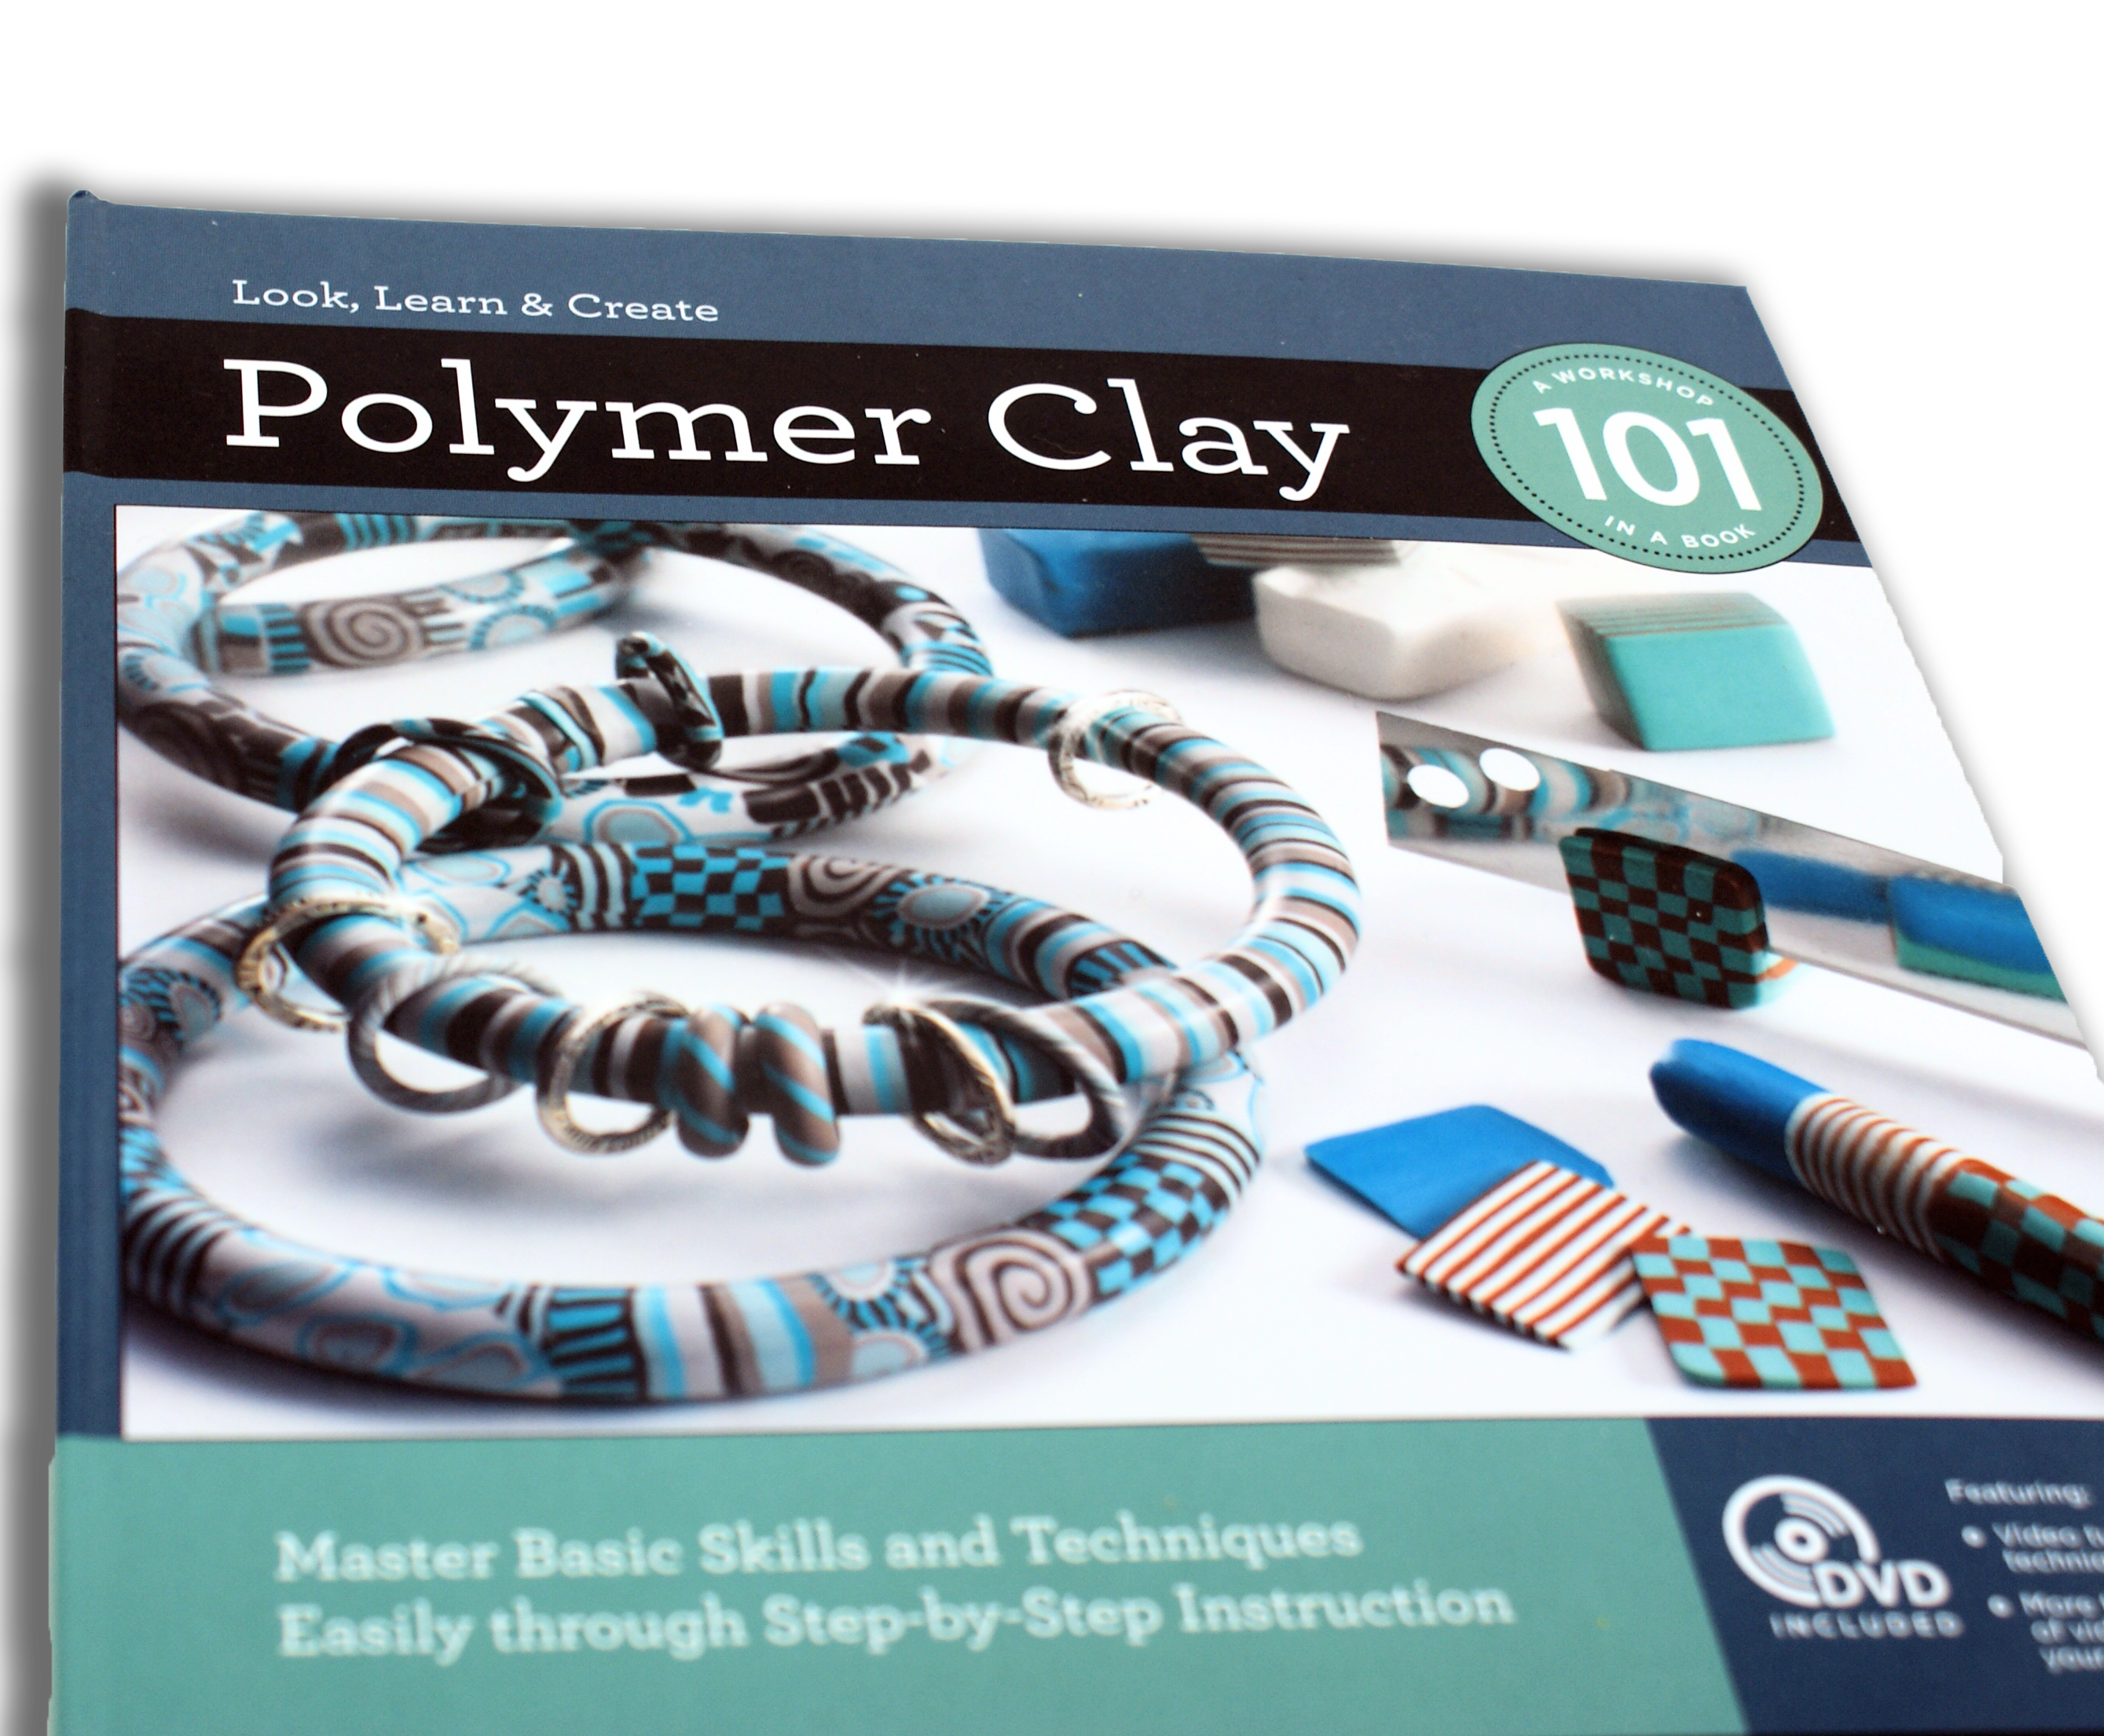 Learn How to Make Your Own Polymer Clay Tools: DIY Tutorial